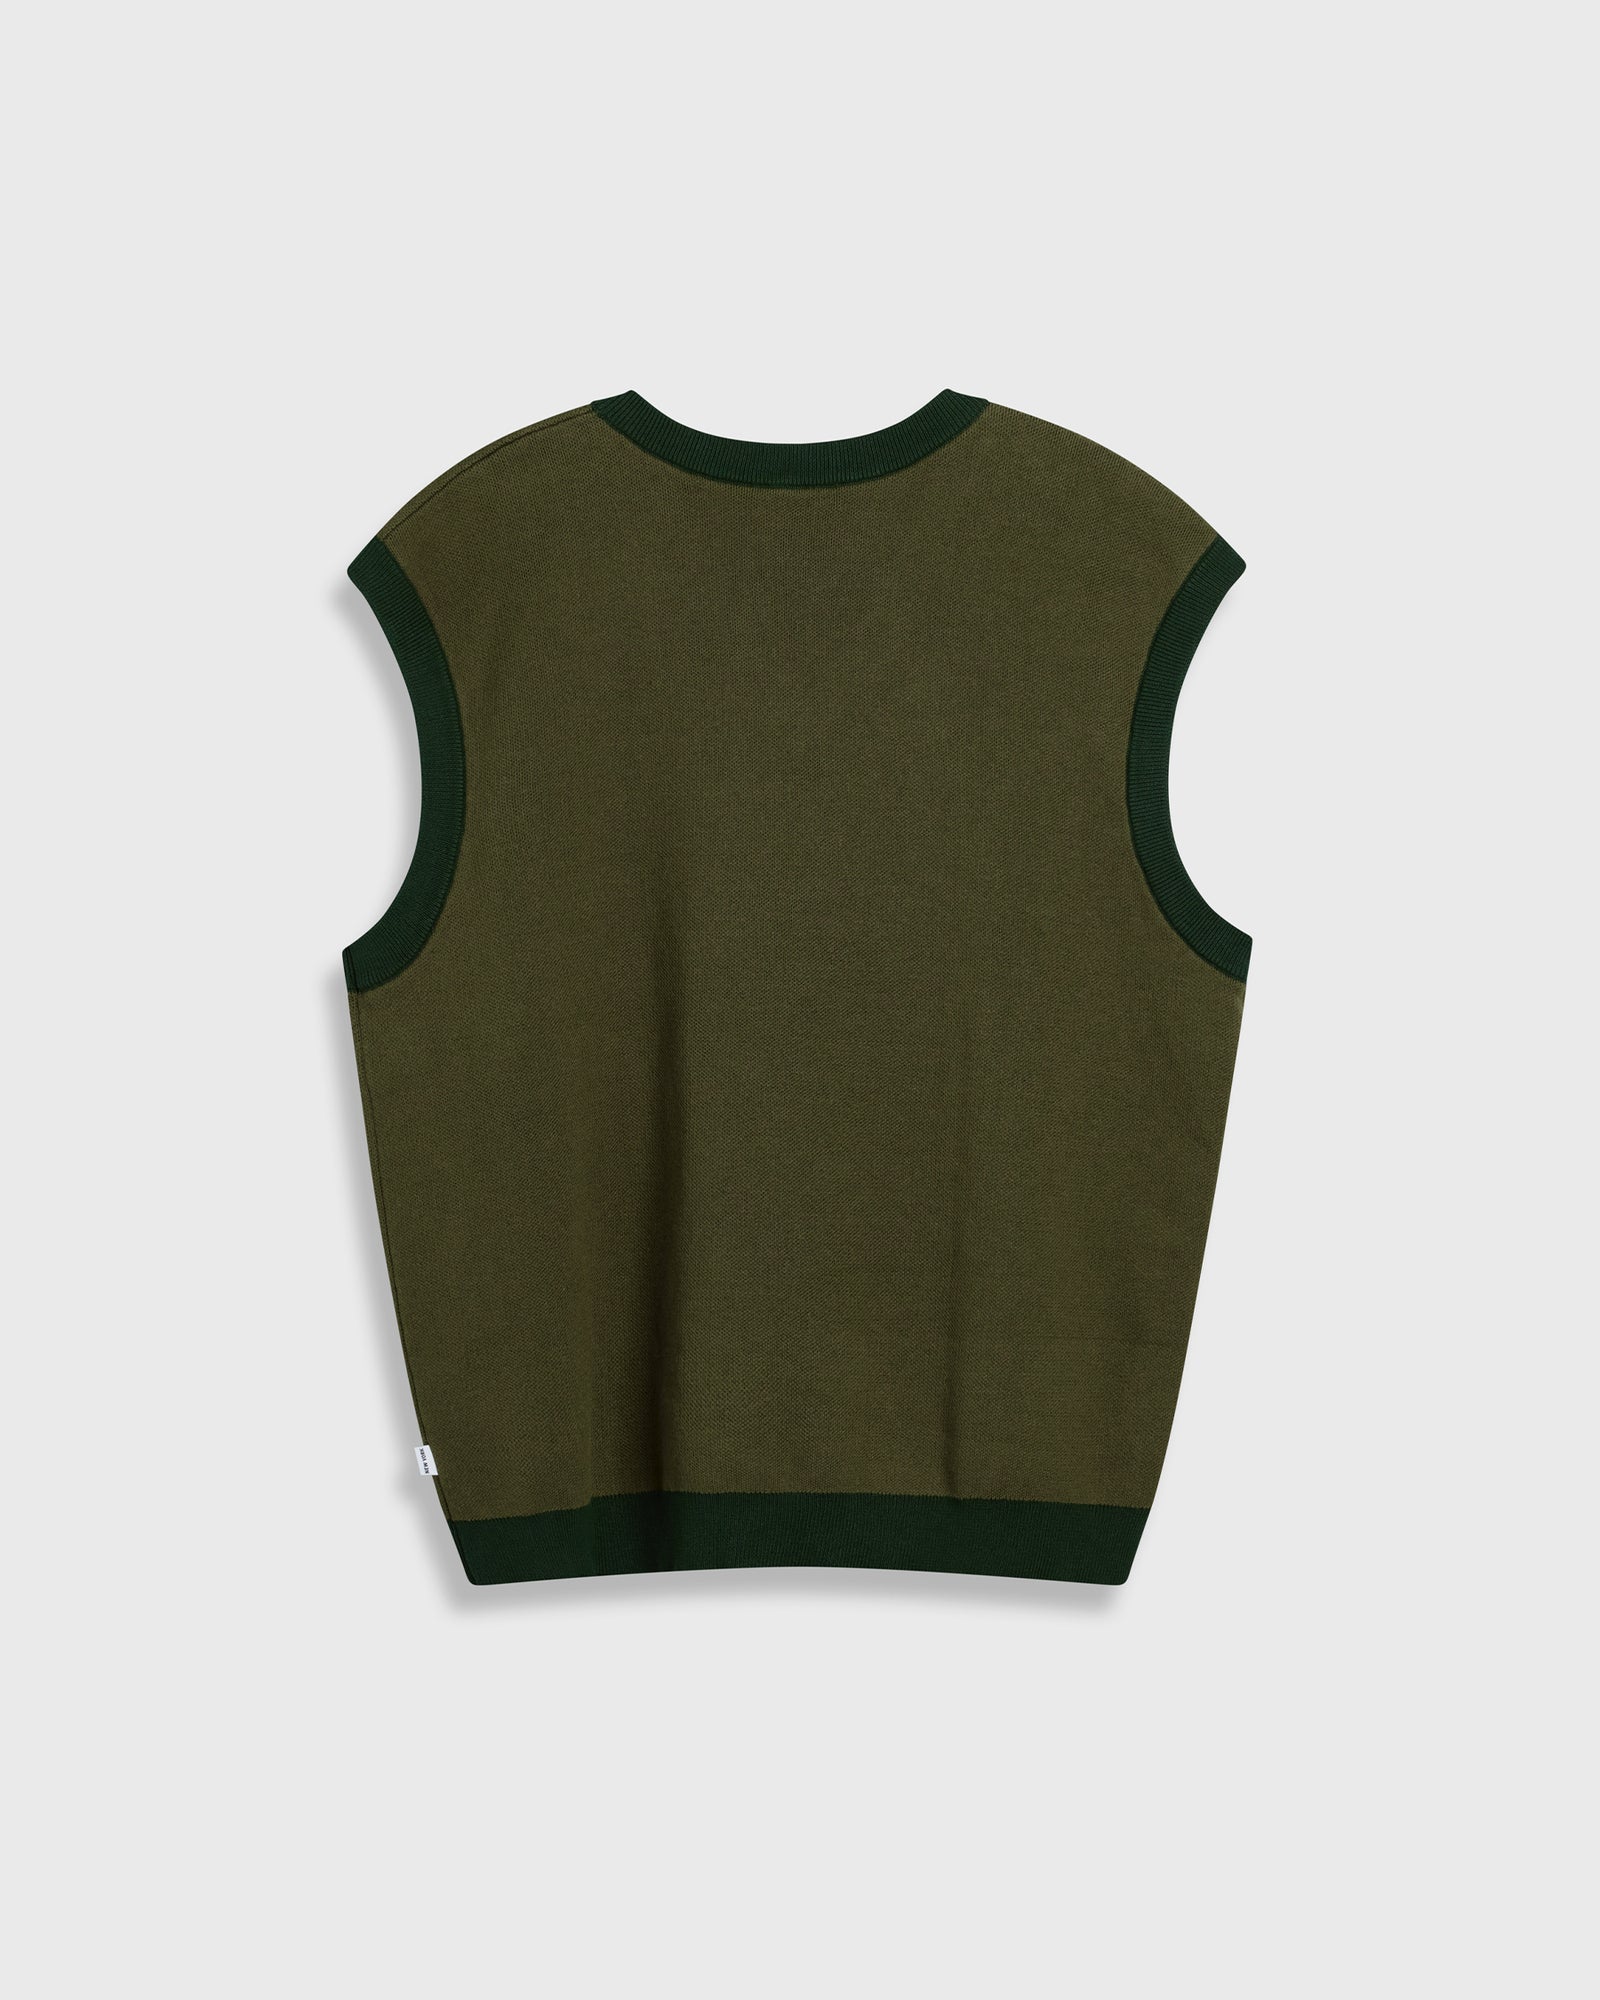 Palm Tree Olive Green Sweater Vest - unisex mens & womens designer fashion sweaters by Krost